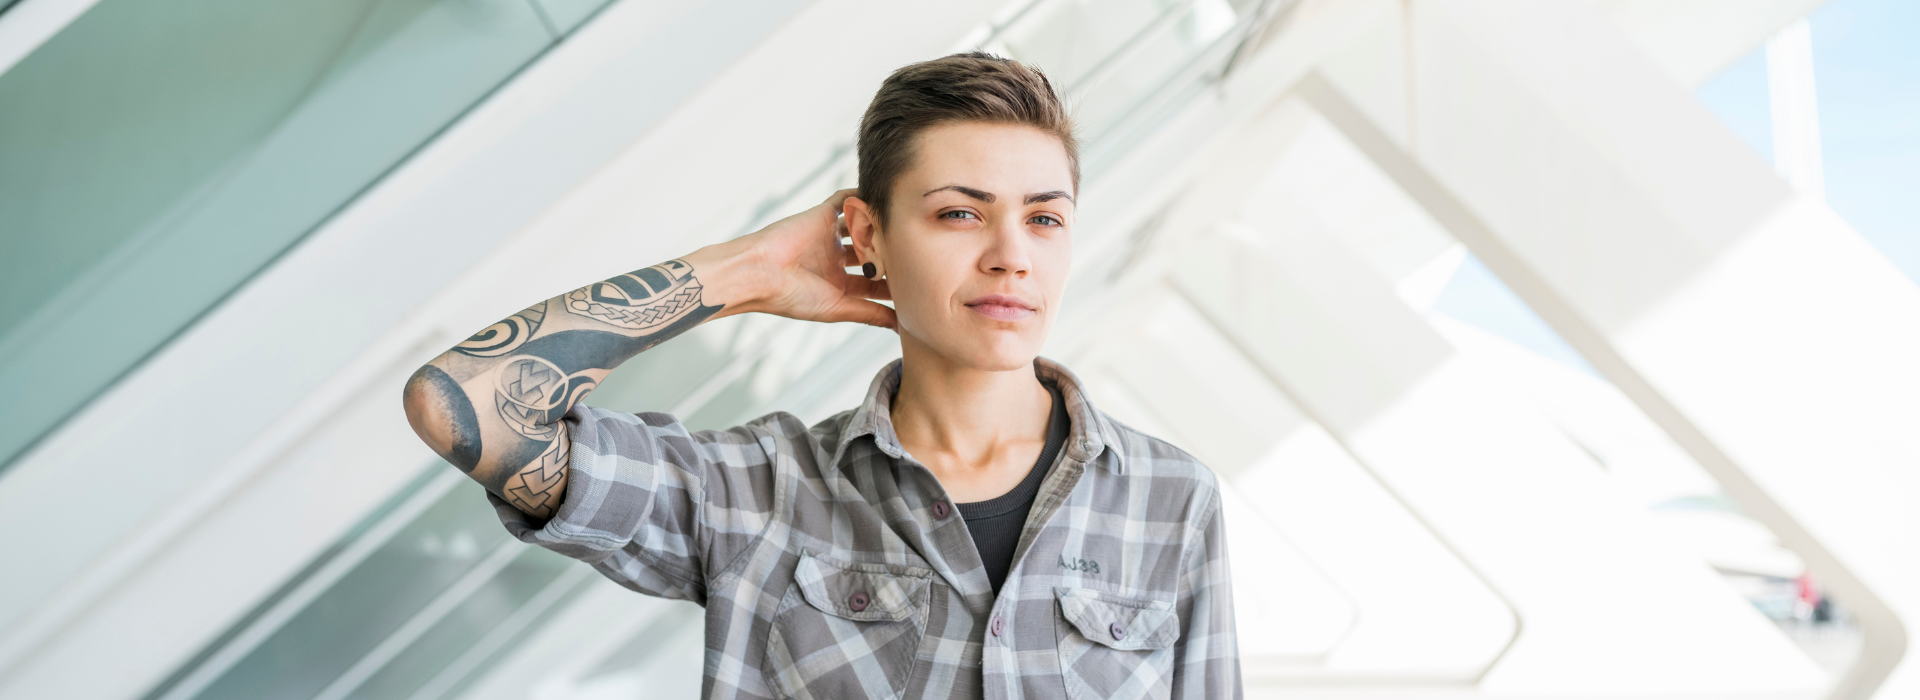 A transgender student with tattoos on their right arm and a plaid button down shirt glance at the camera.